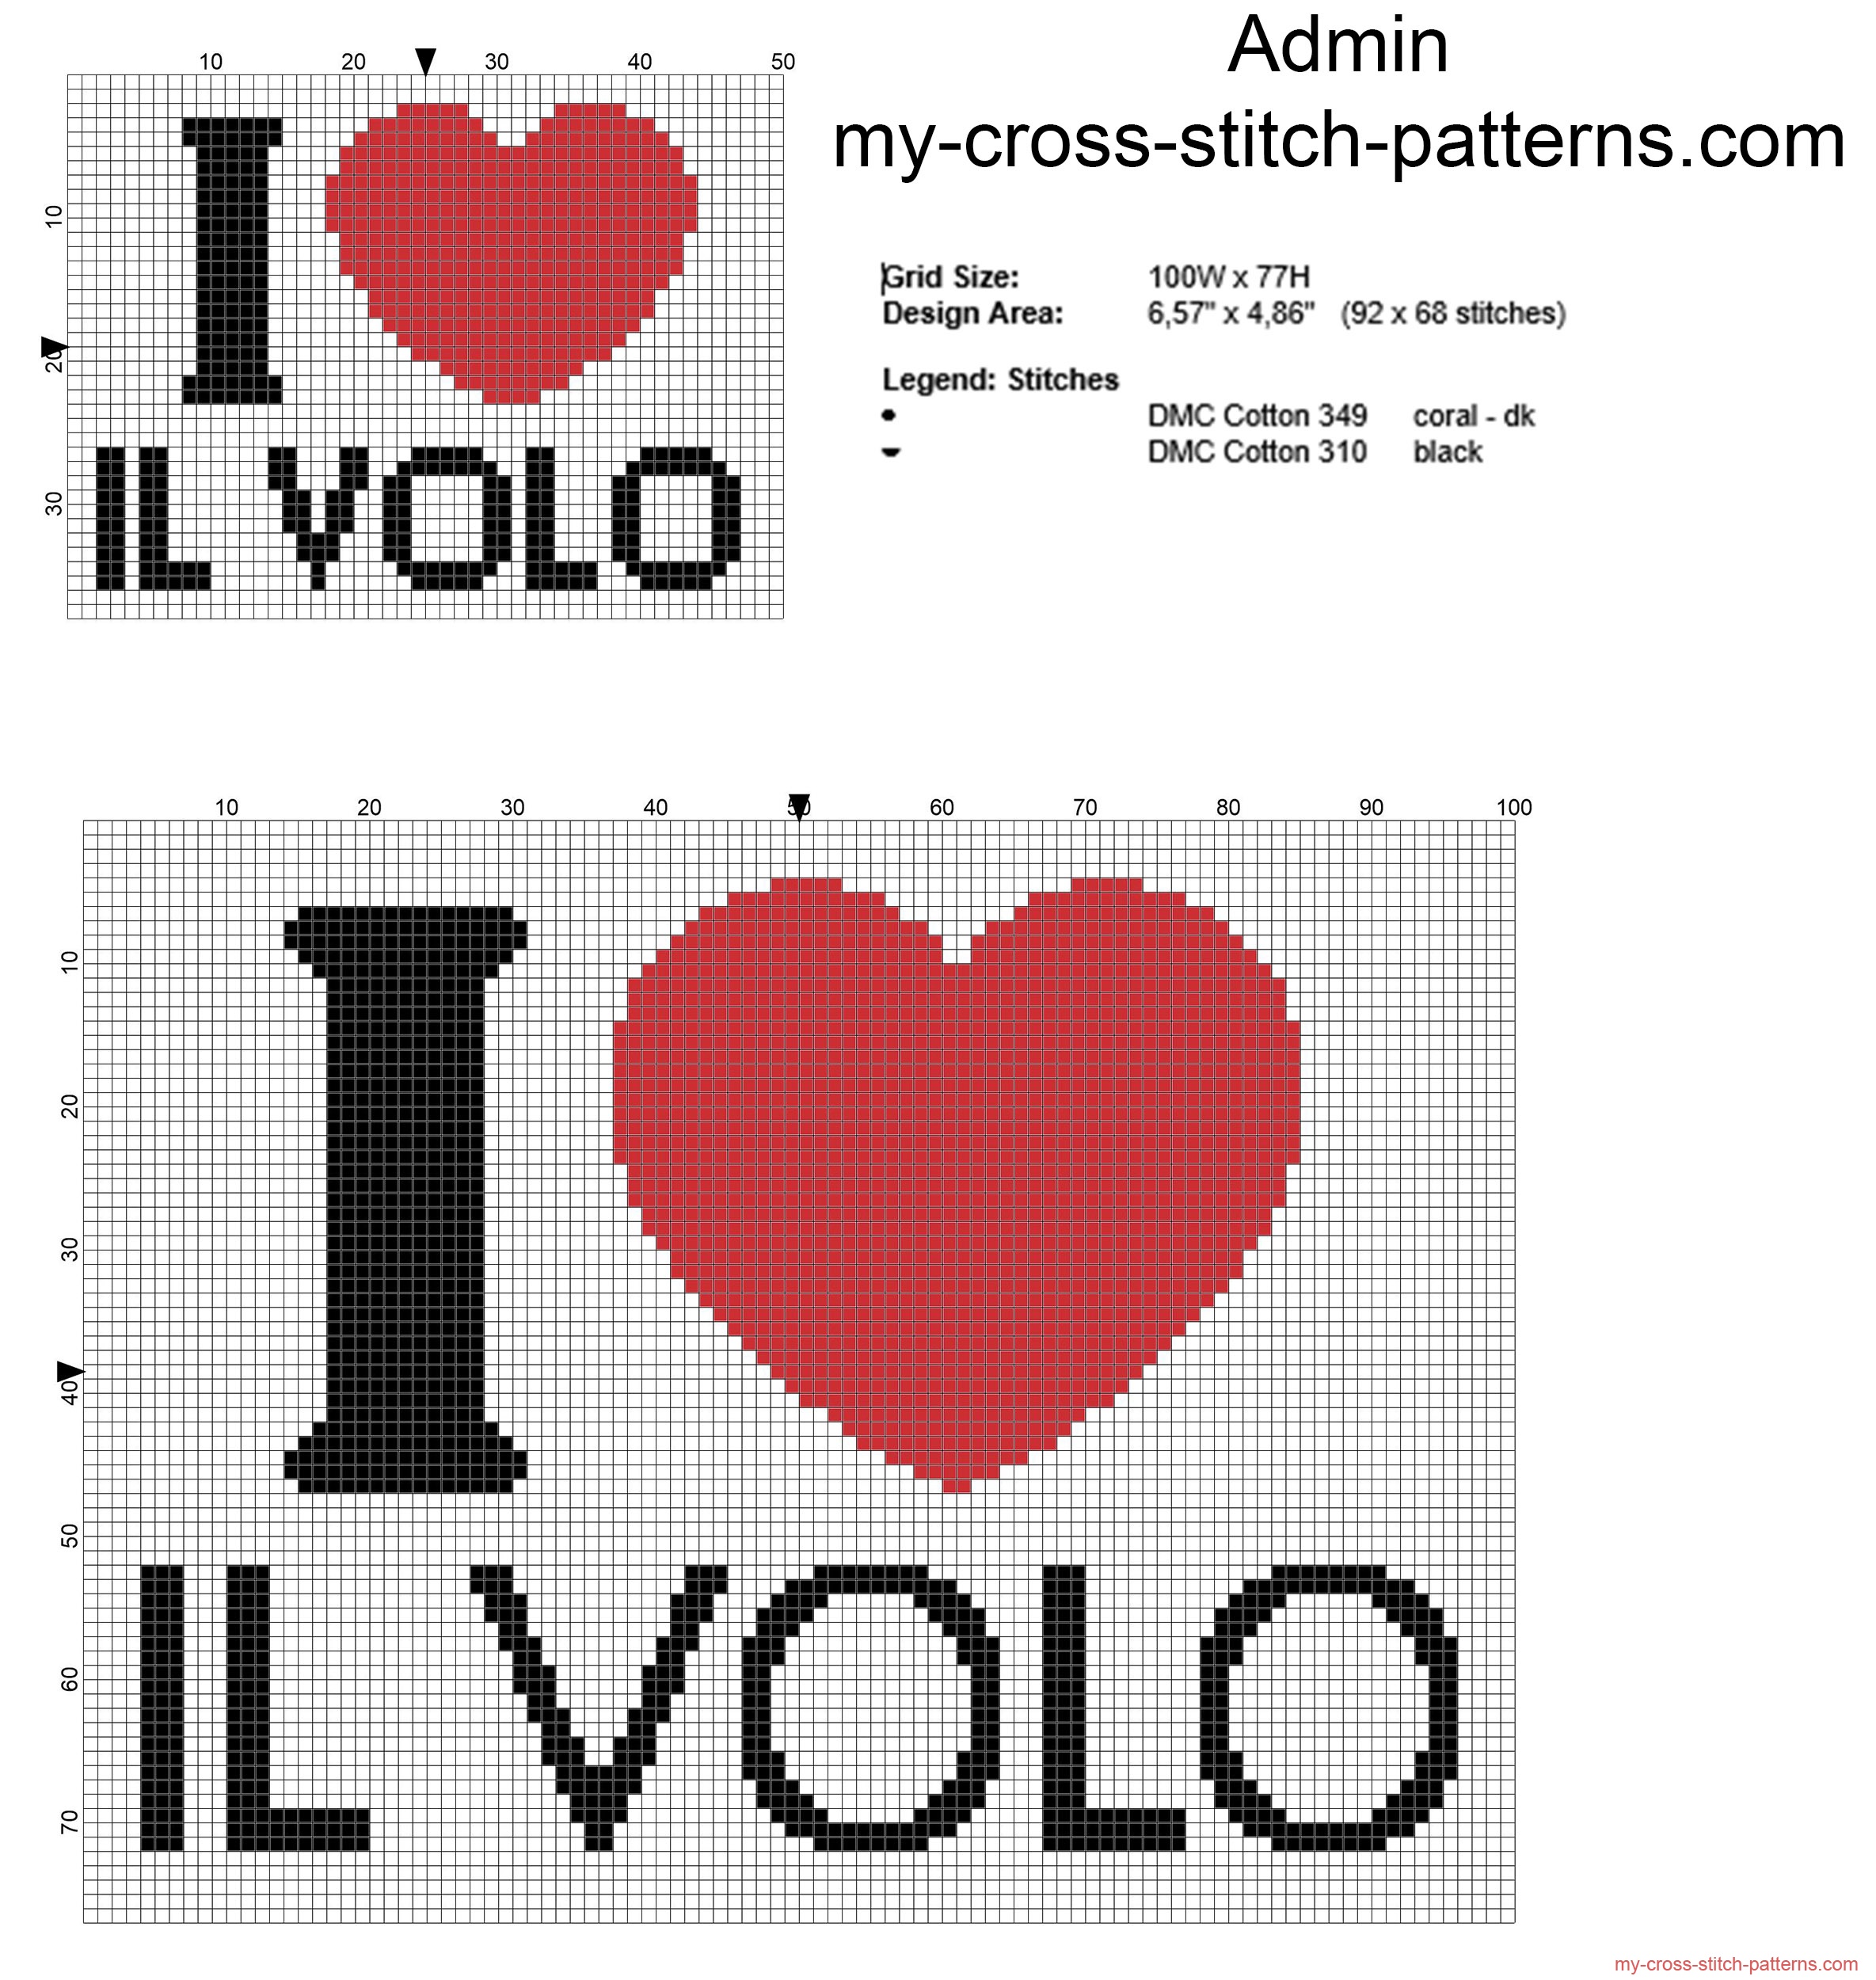 i_love_il_volo_italian_music_band_free_cross_stitch_pattern_in_two_sizes_small_and_big